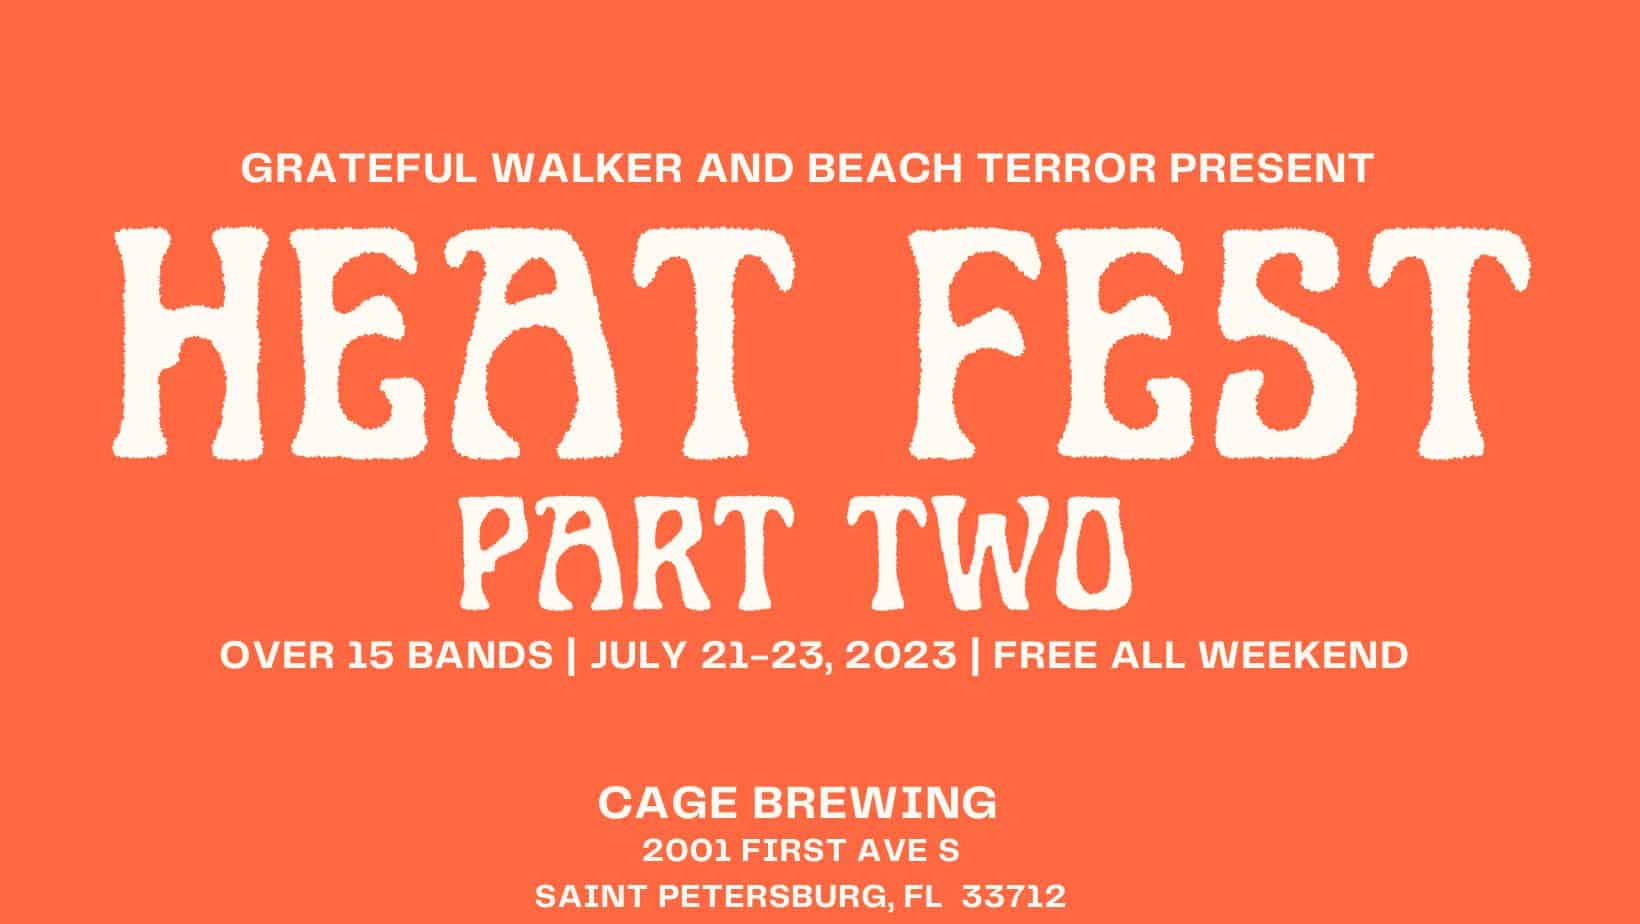 Grateful Walker and Beach Terror present Heat Fest Part Two at Cage Brewing July 21-23 with over 15 bands. Free all weekend.